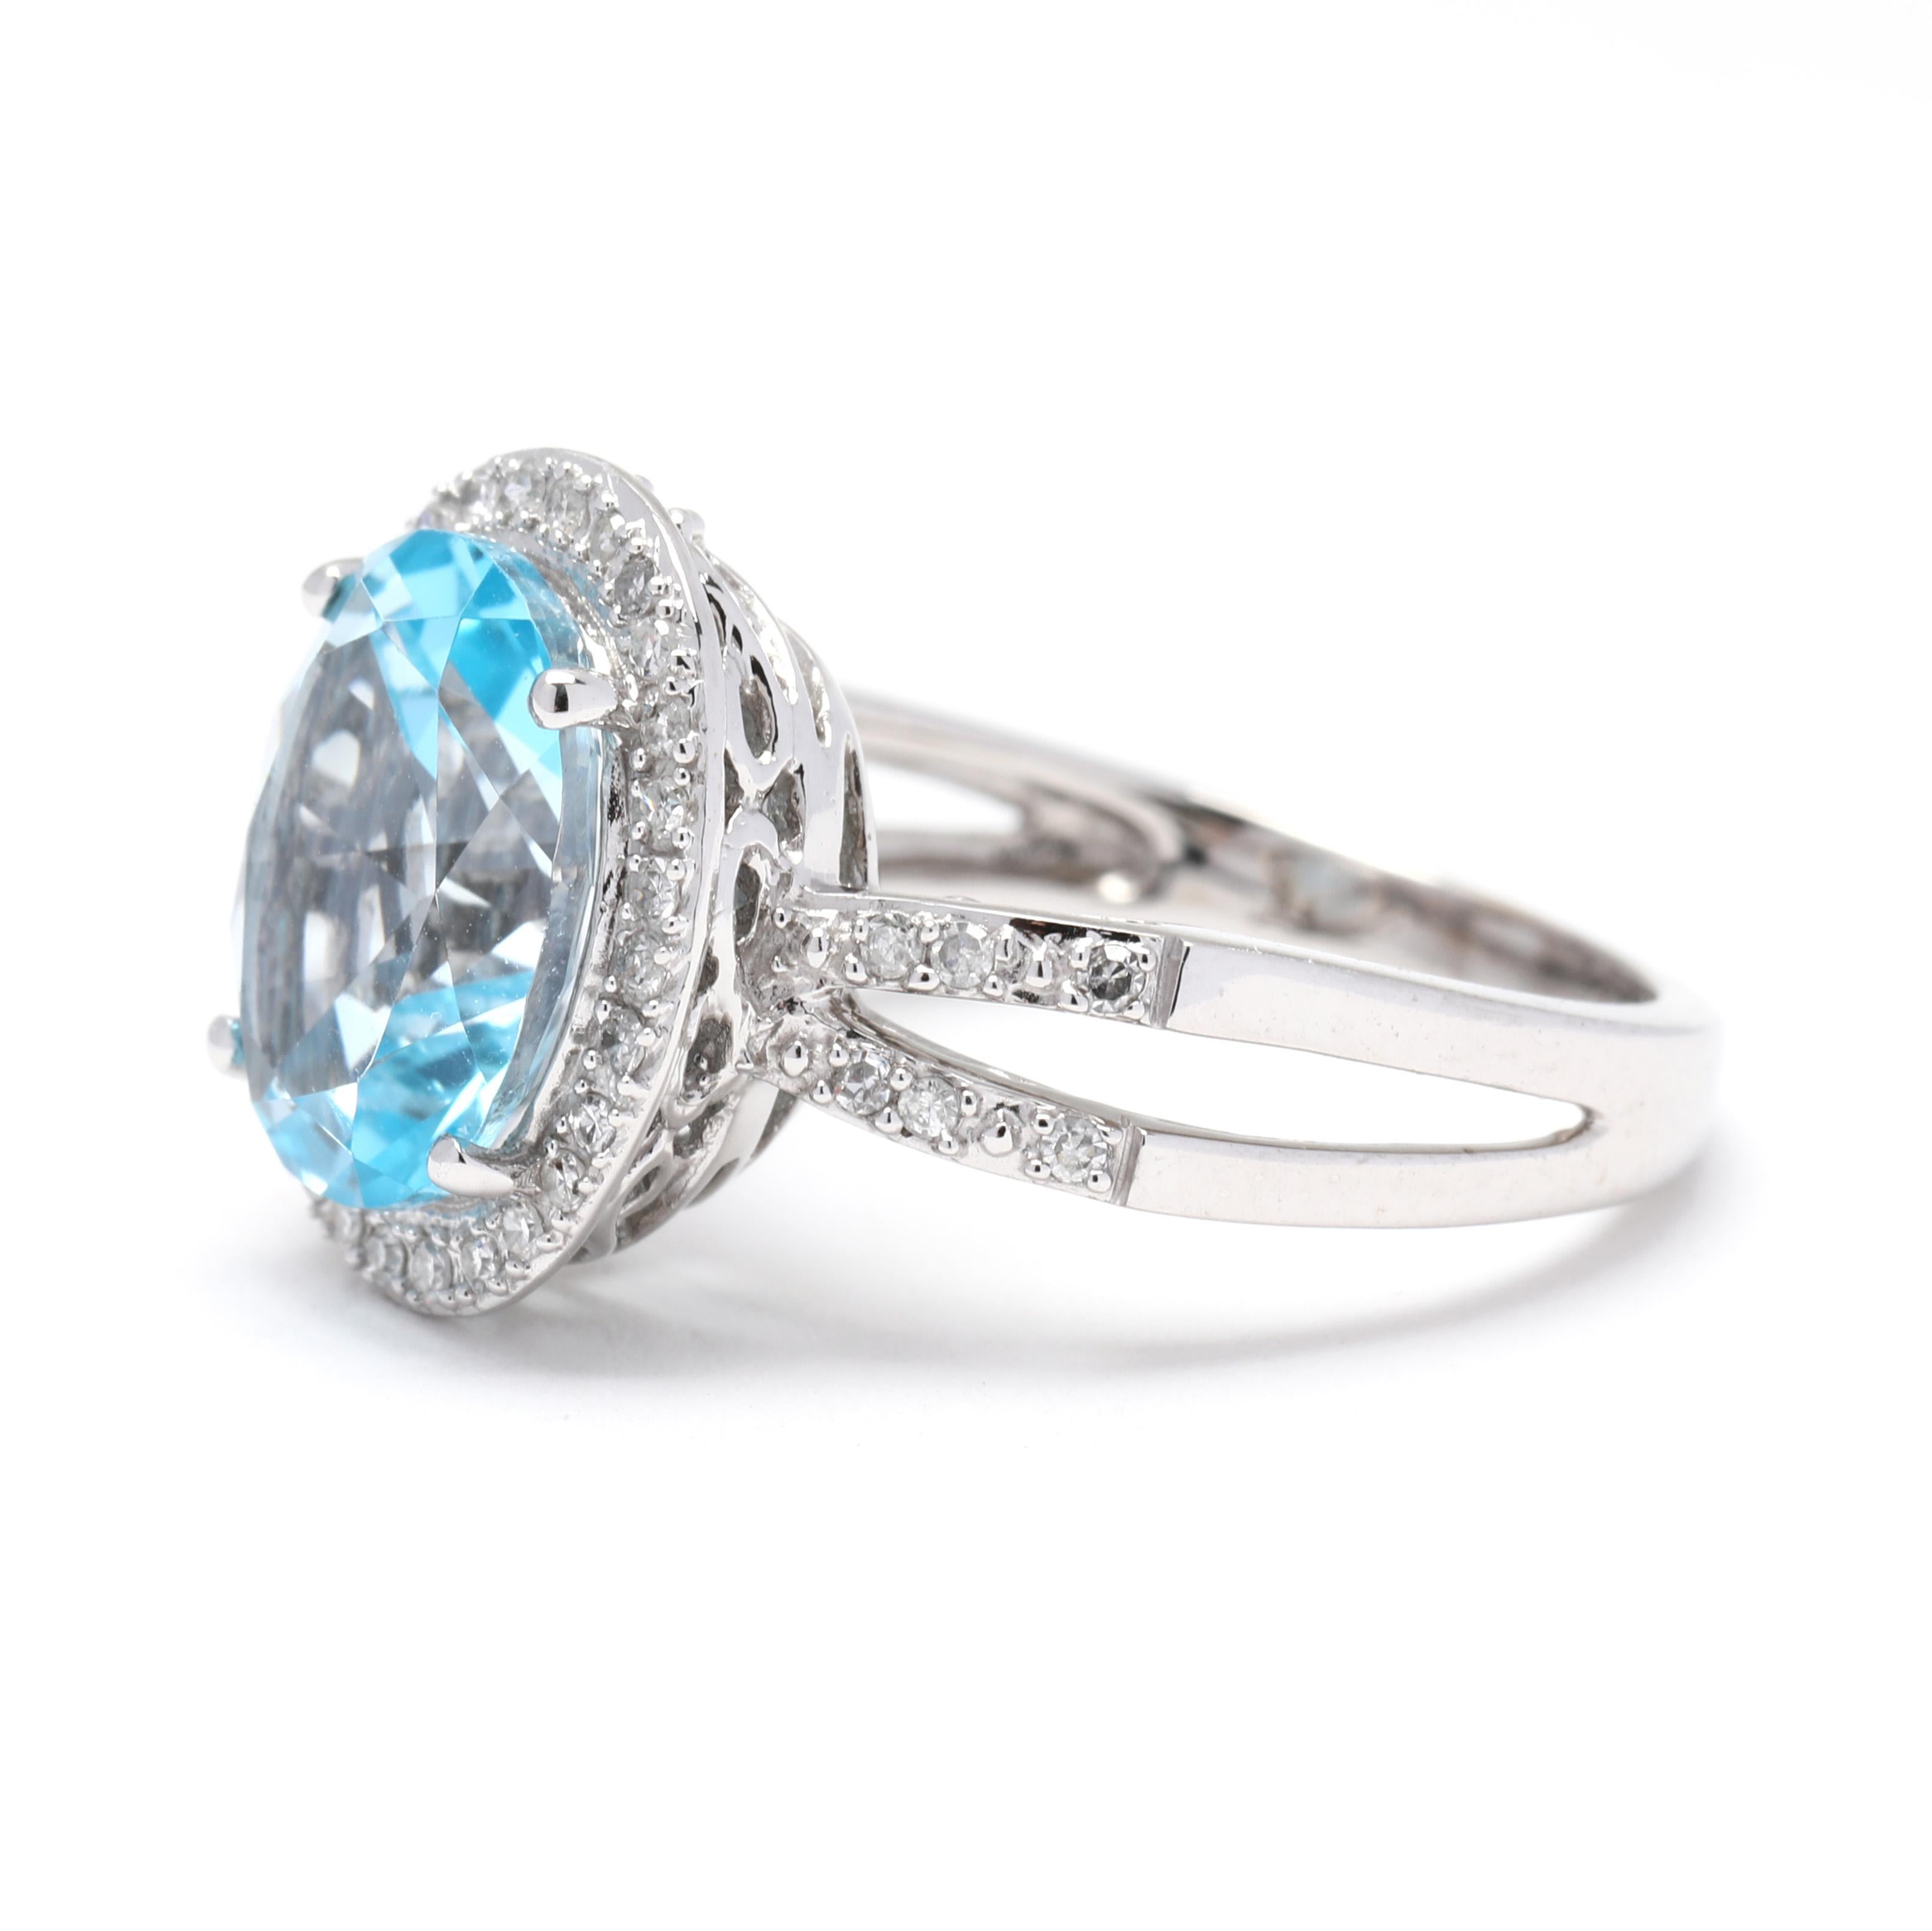 4.7ctw Blue Topaz & Diamond Halo Split Shank Ring, 14k White Gold, Ring Size 6.5 In Good Condition For Sale In McLeansville, NC